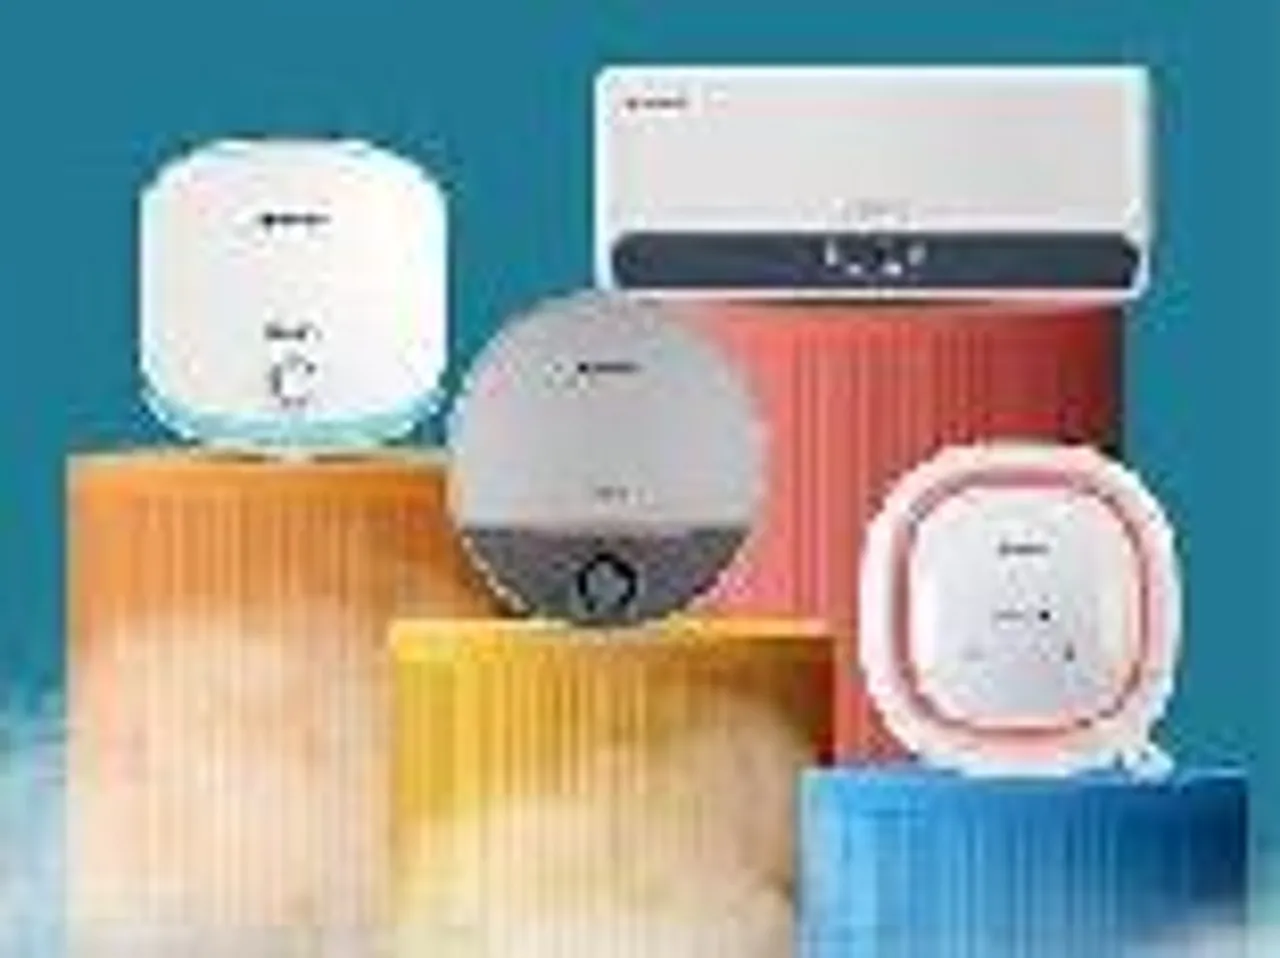 Havells Launches Unconventionally Beautiful Range of Storage Water Heaters- Otto and Orizzonte